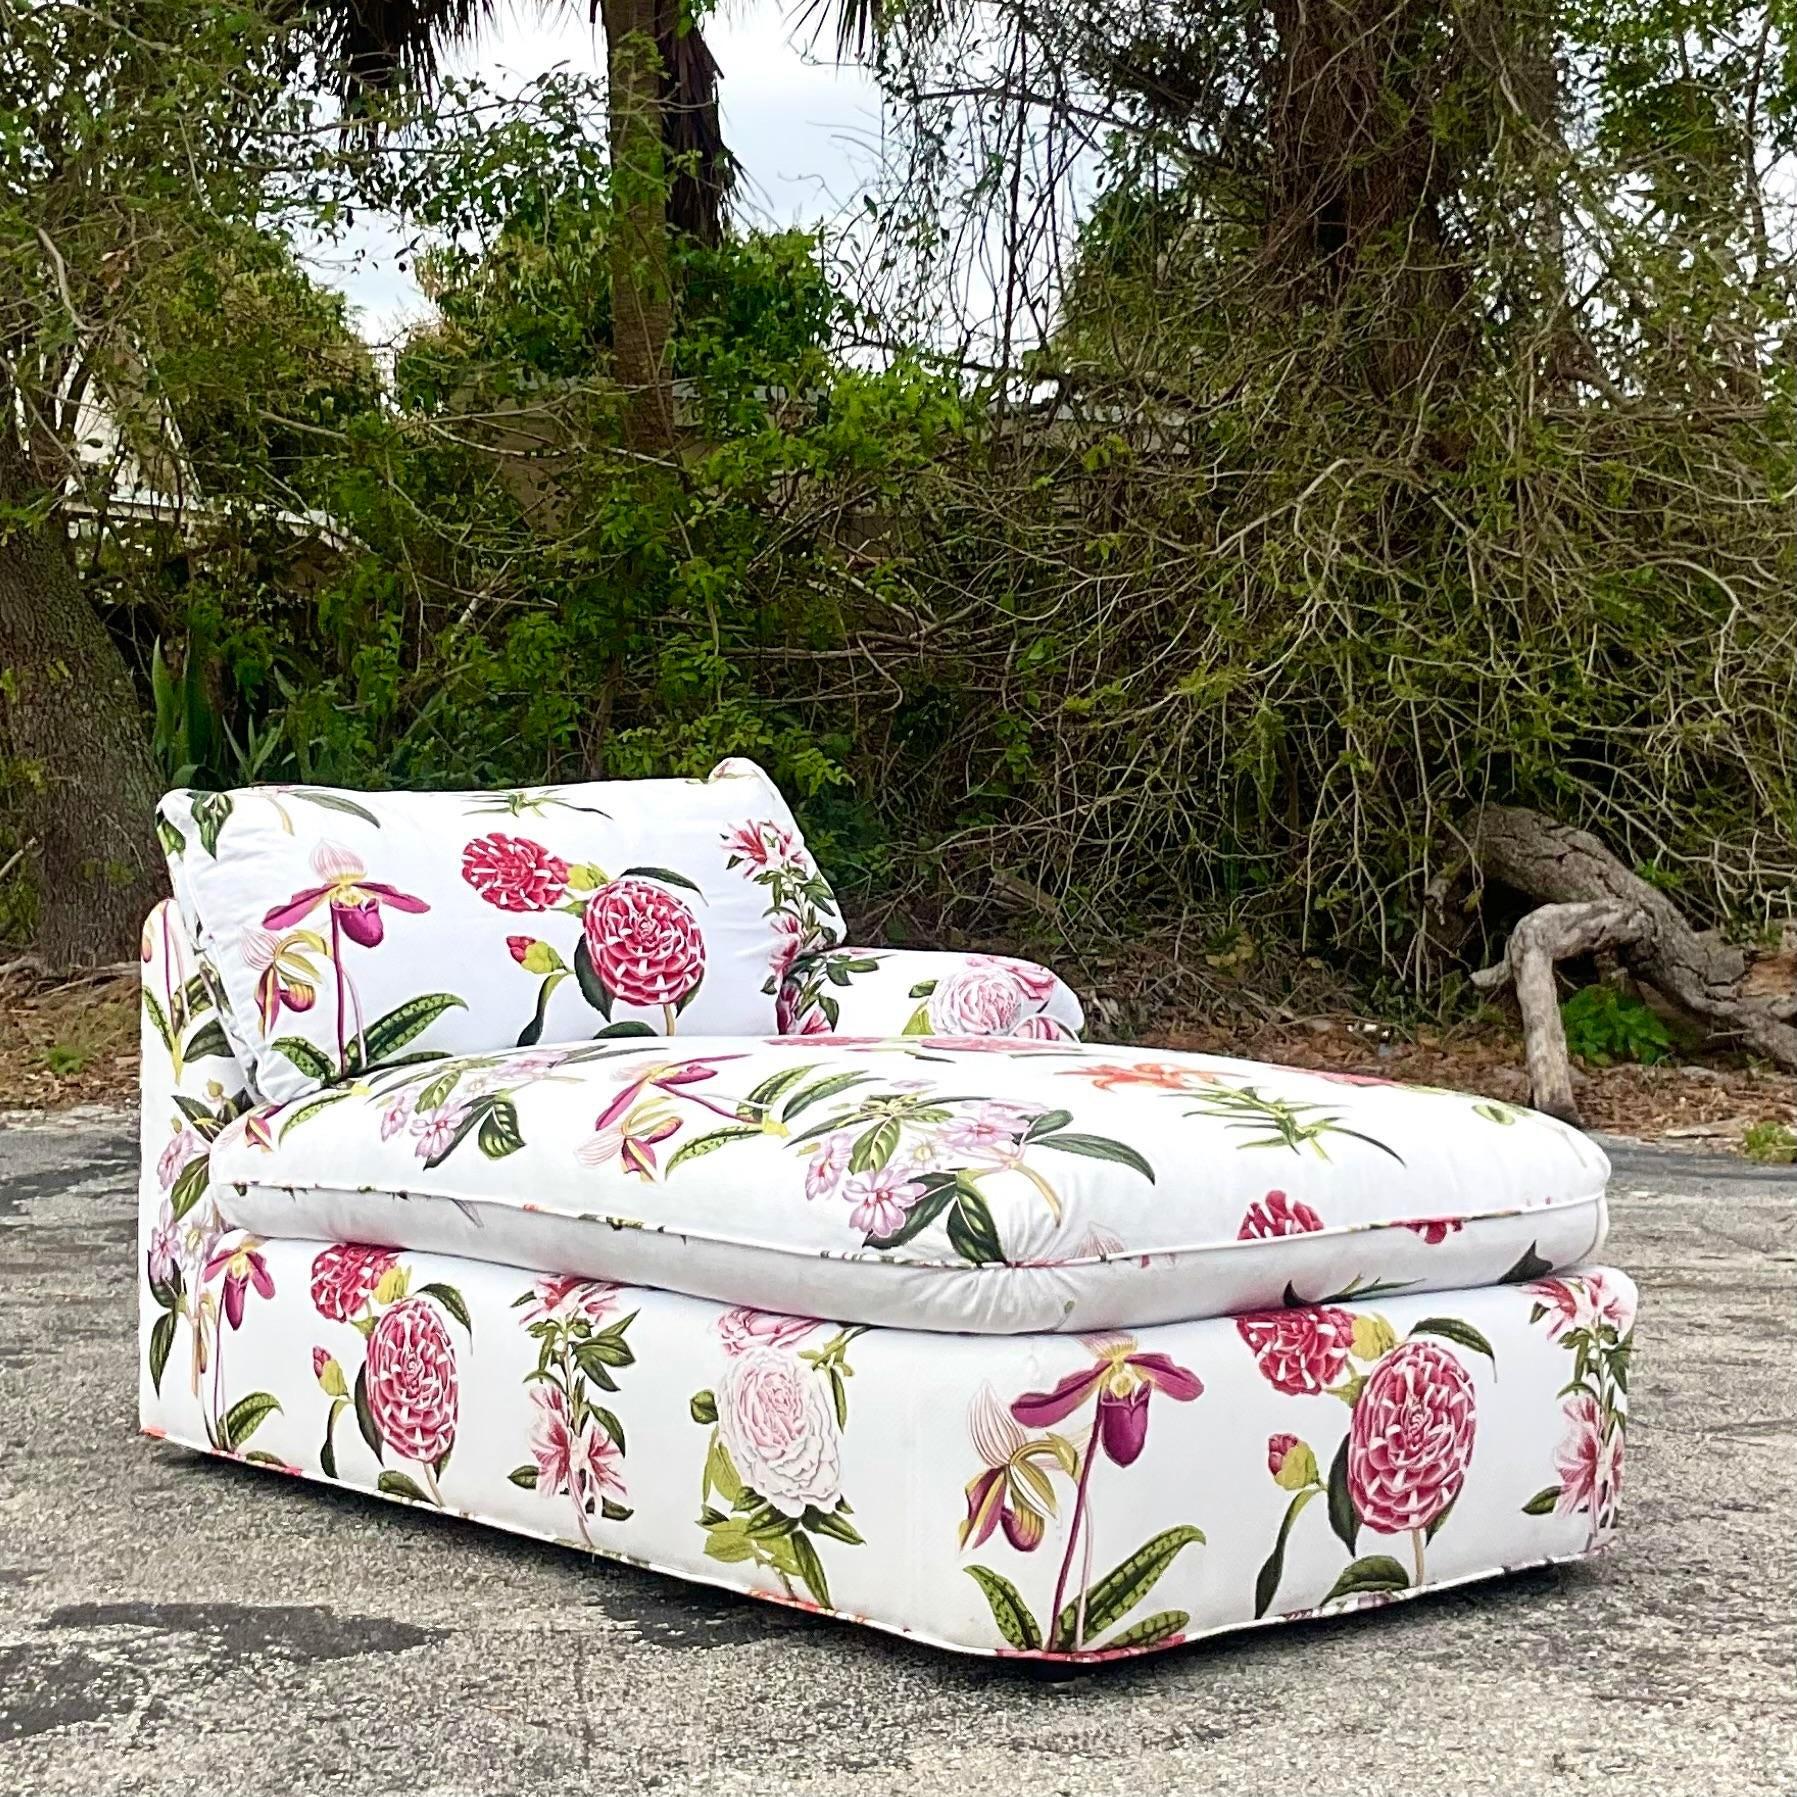 A stunning vintage Regency chaise lounge. A brilliantly colored floral print on cotton jacquard. Down filled cushion. Coordinating pieces also available on my page. Acquired from a Palm Beach estate. 